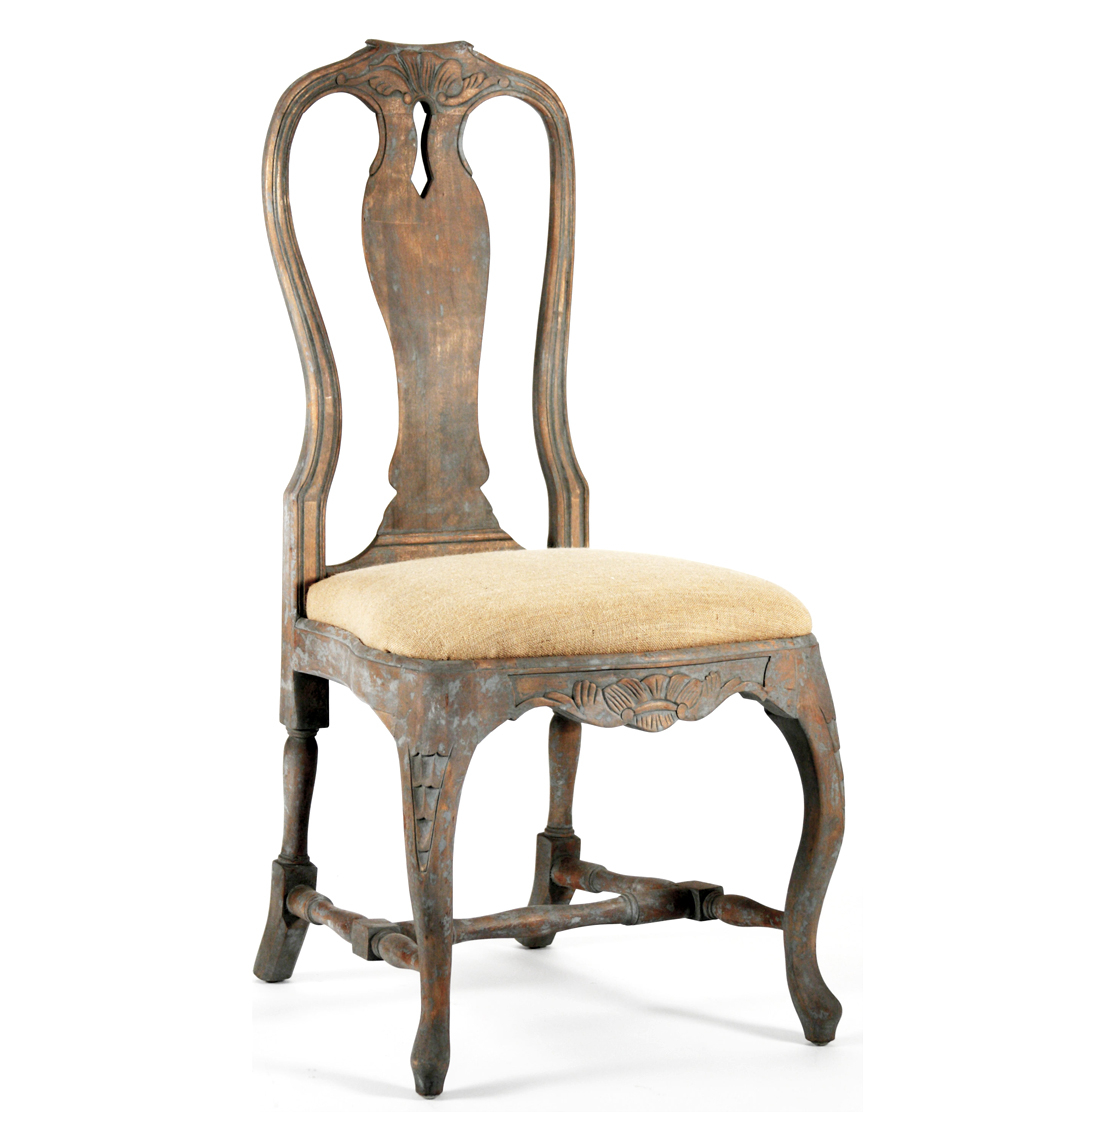 Pictures of queen anne chairs